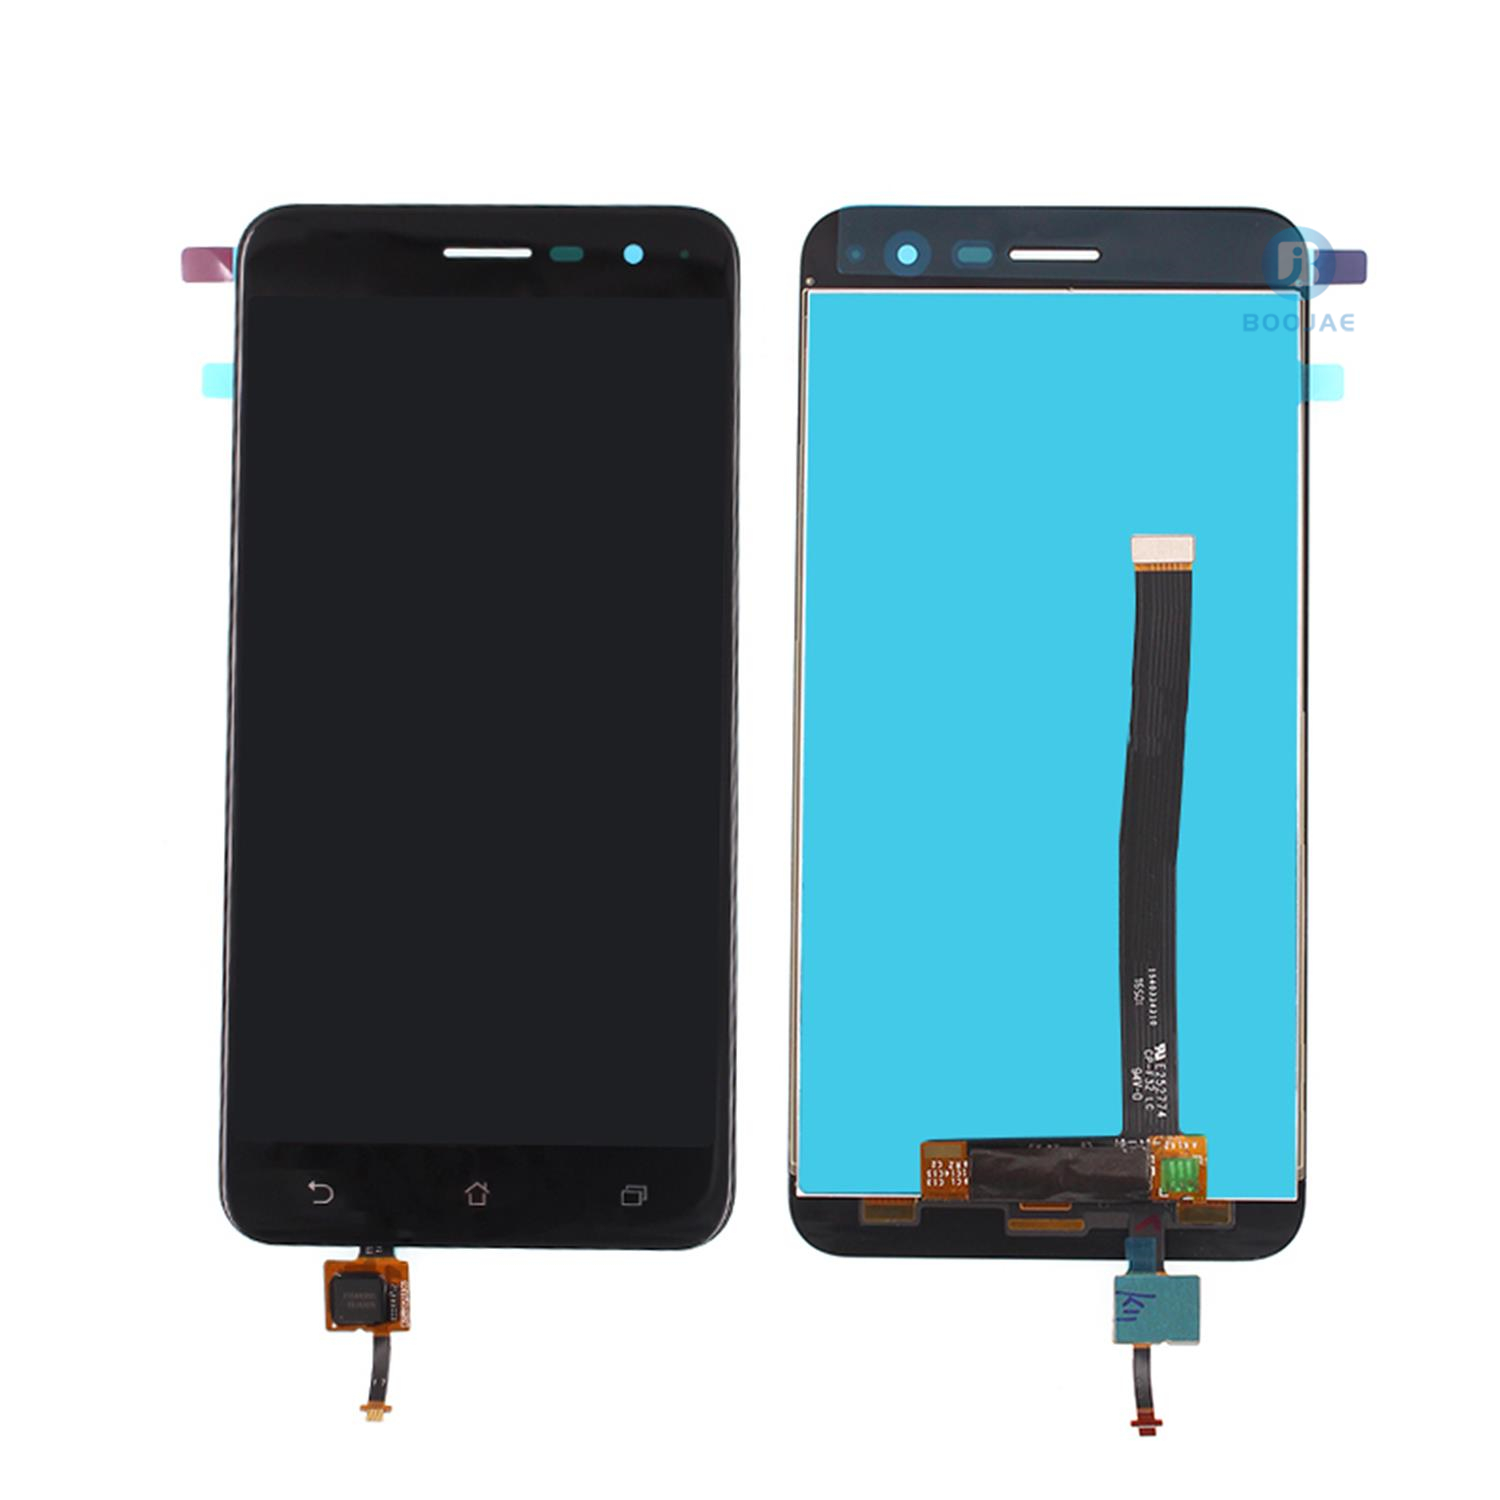 Asus Zenfone ZE520KL LCD Screen Display, Lcd Assembly Replacement